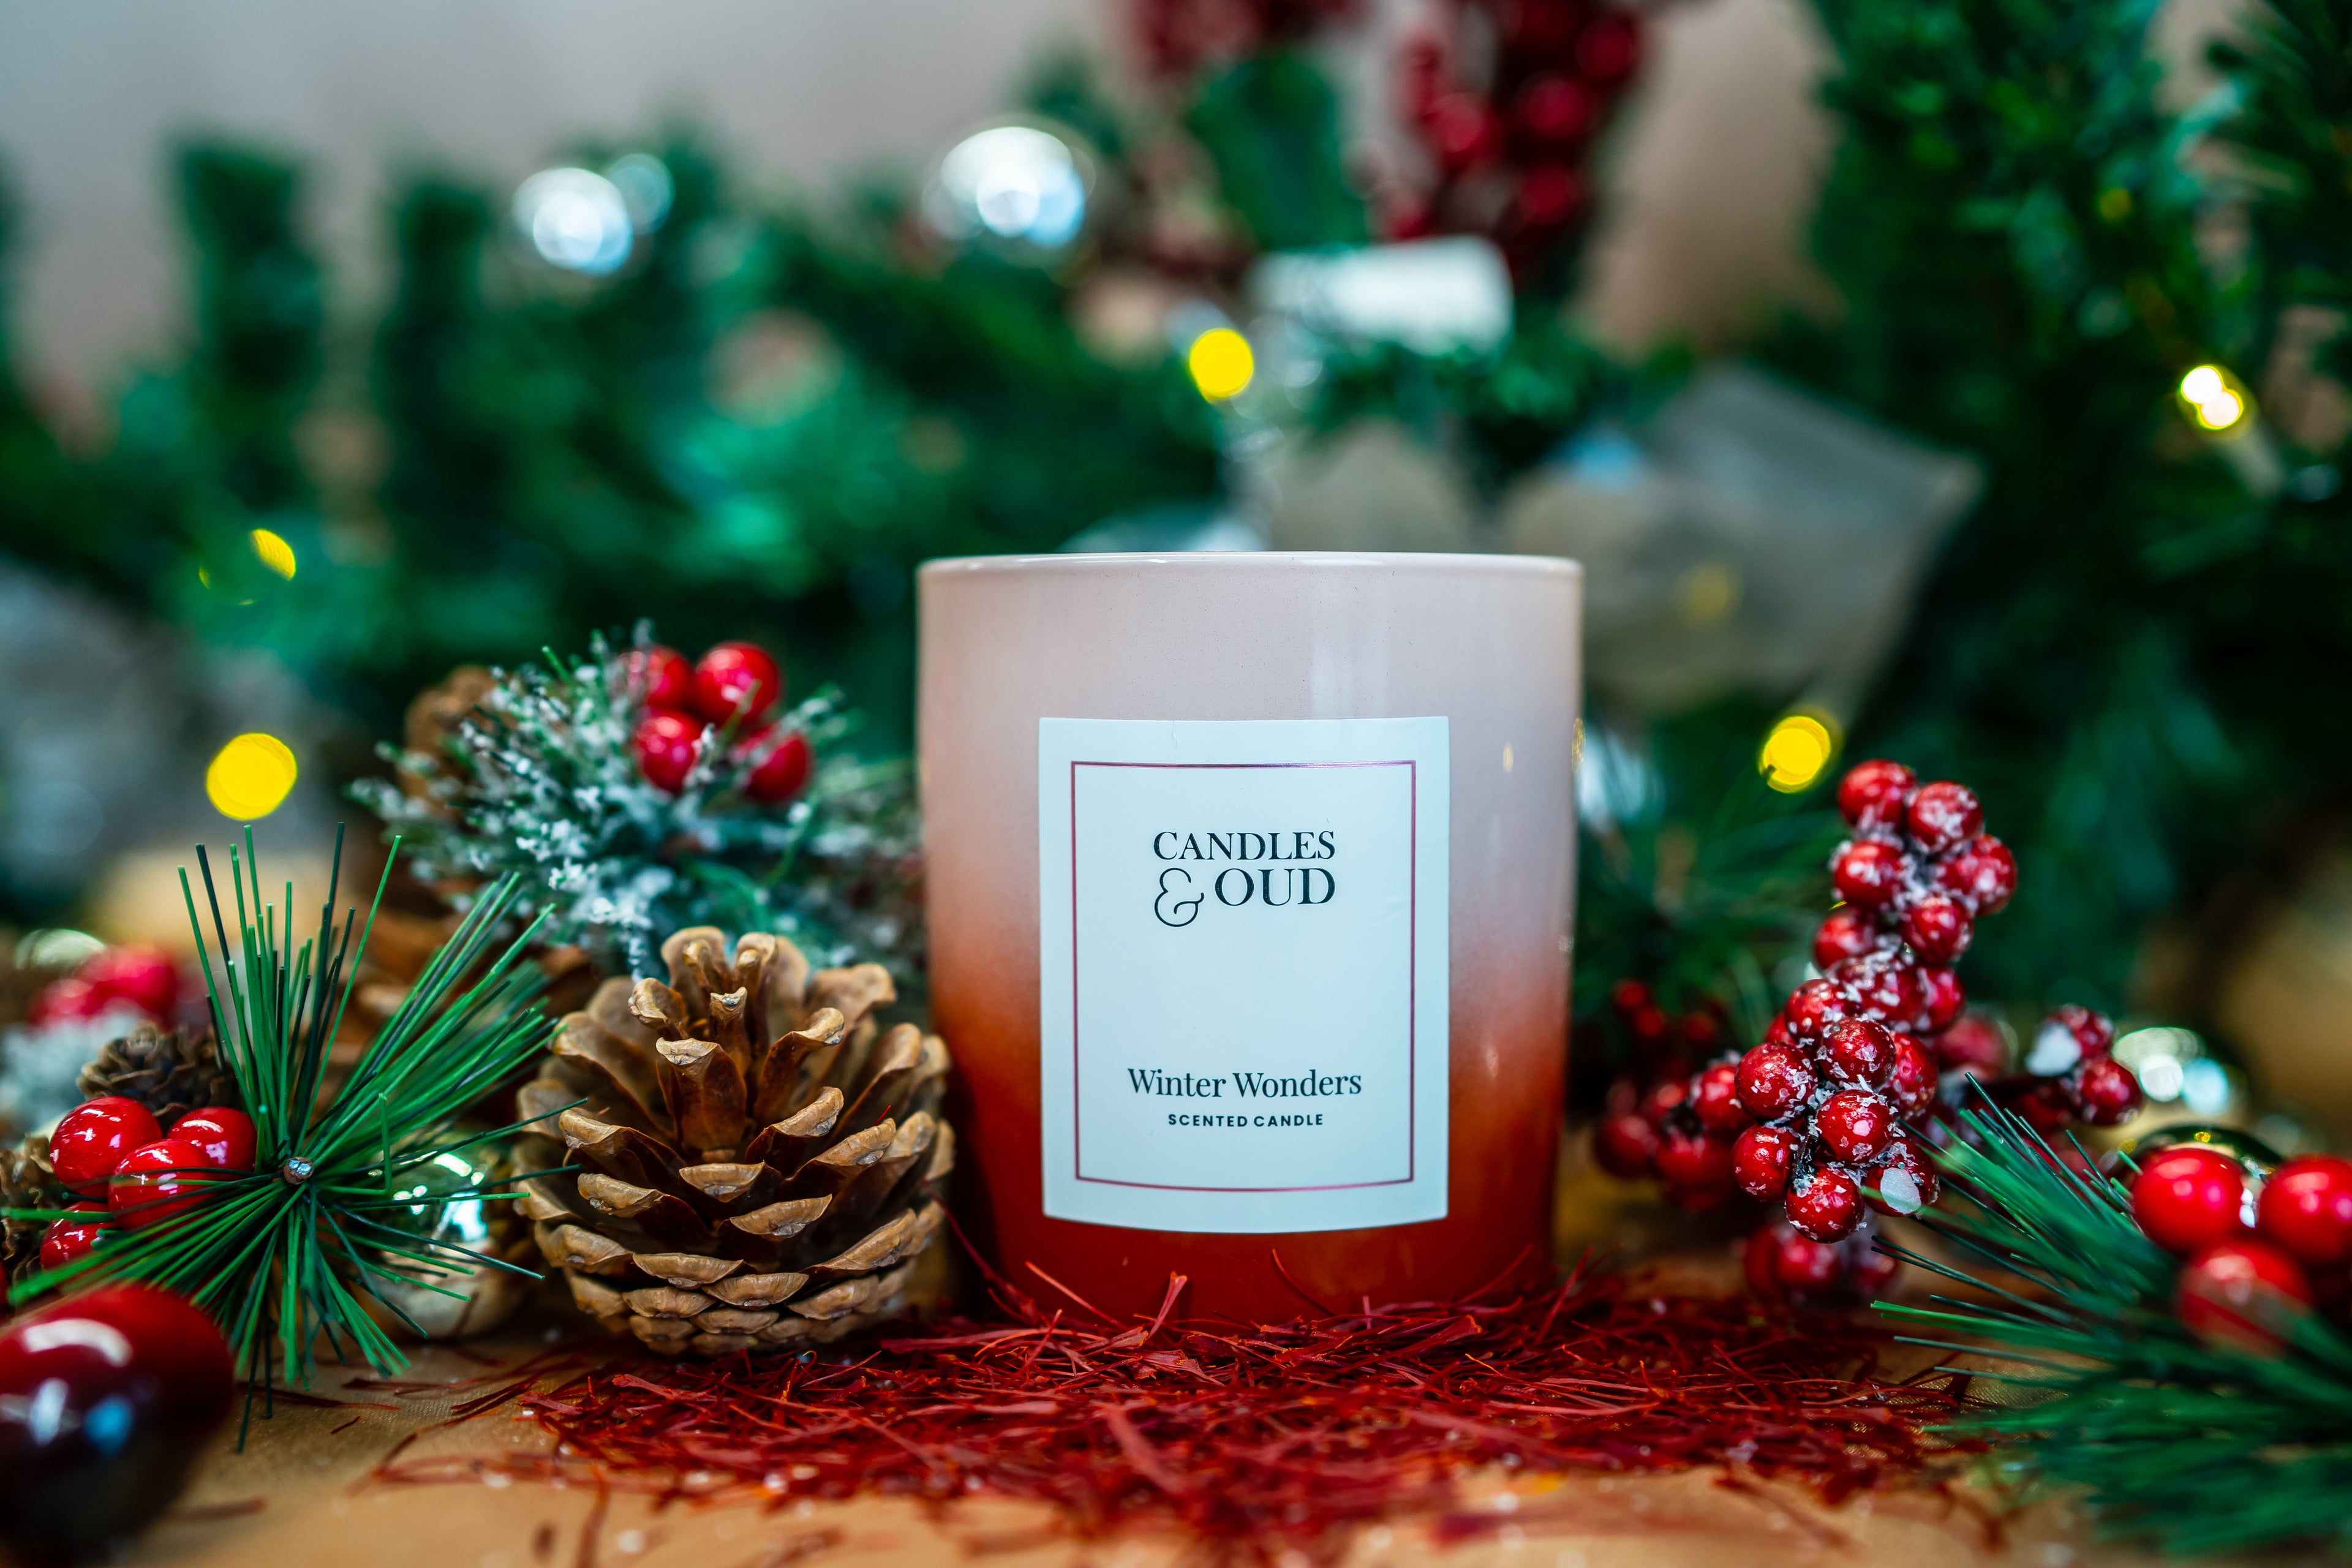 Winter Wonders Candle